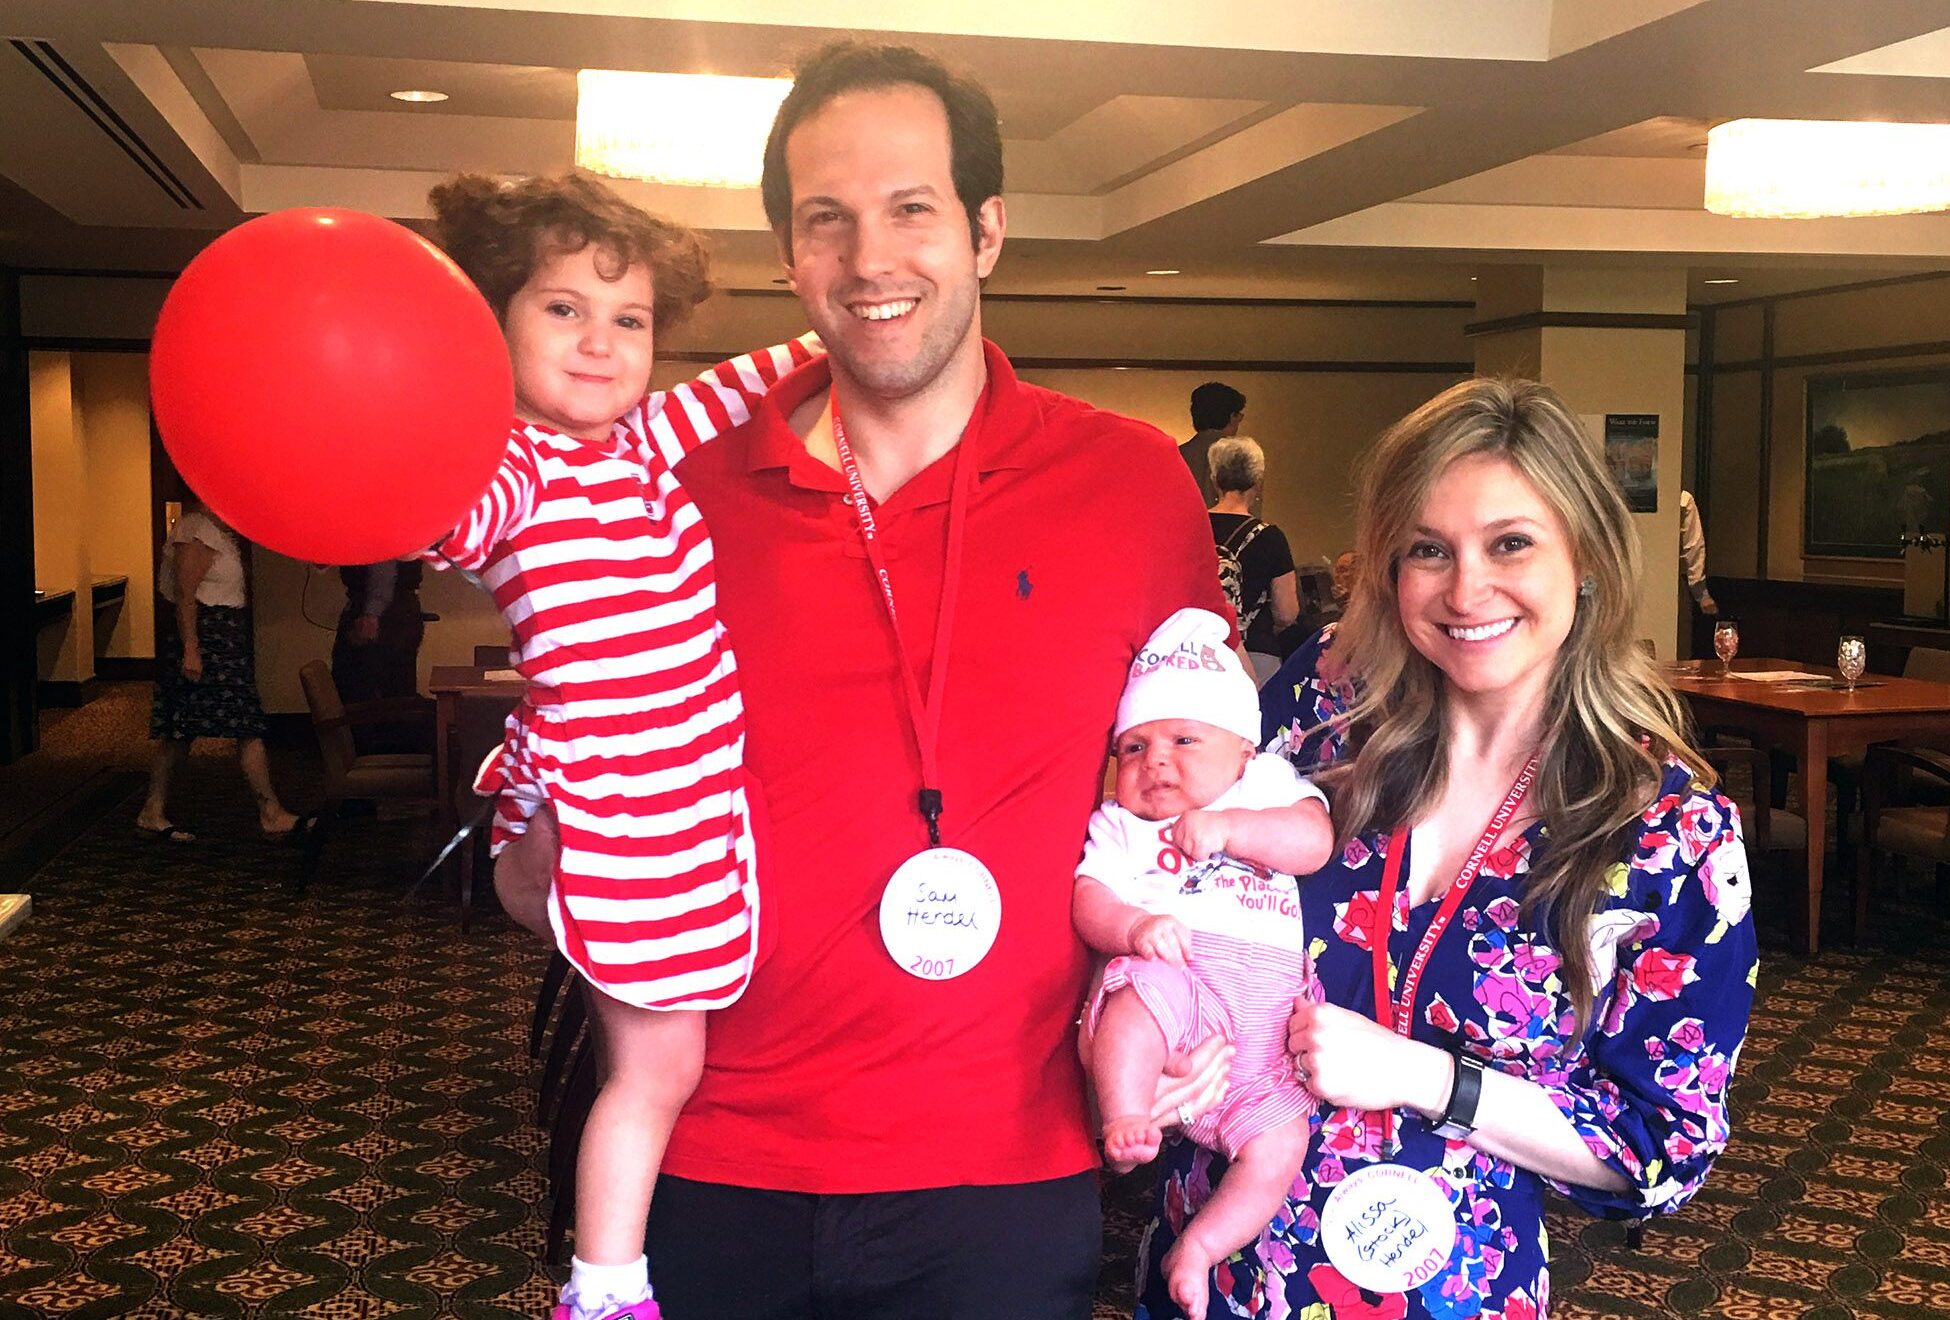 Alissa Hendel ’07 with her family at her ten-year Cornell Reunion in 2017. Her five-week-old son, Dylan, won youngest Reunion attendee.